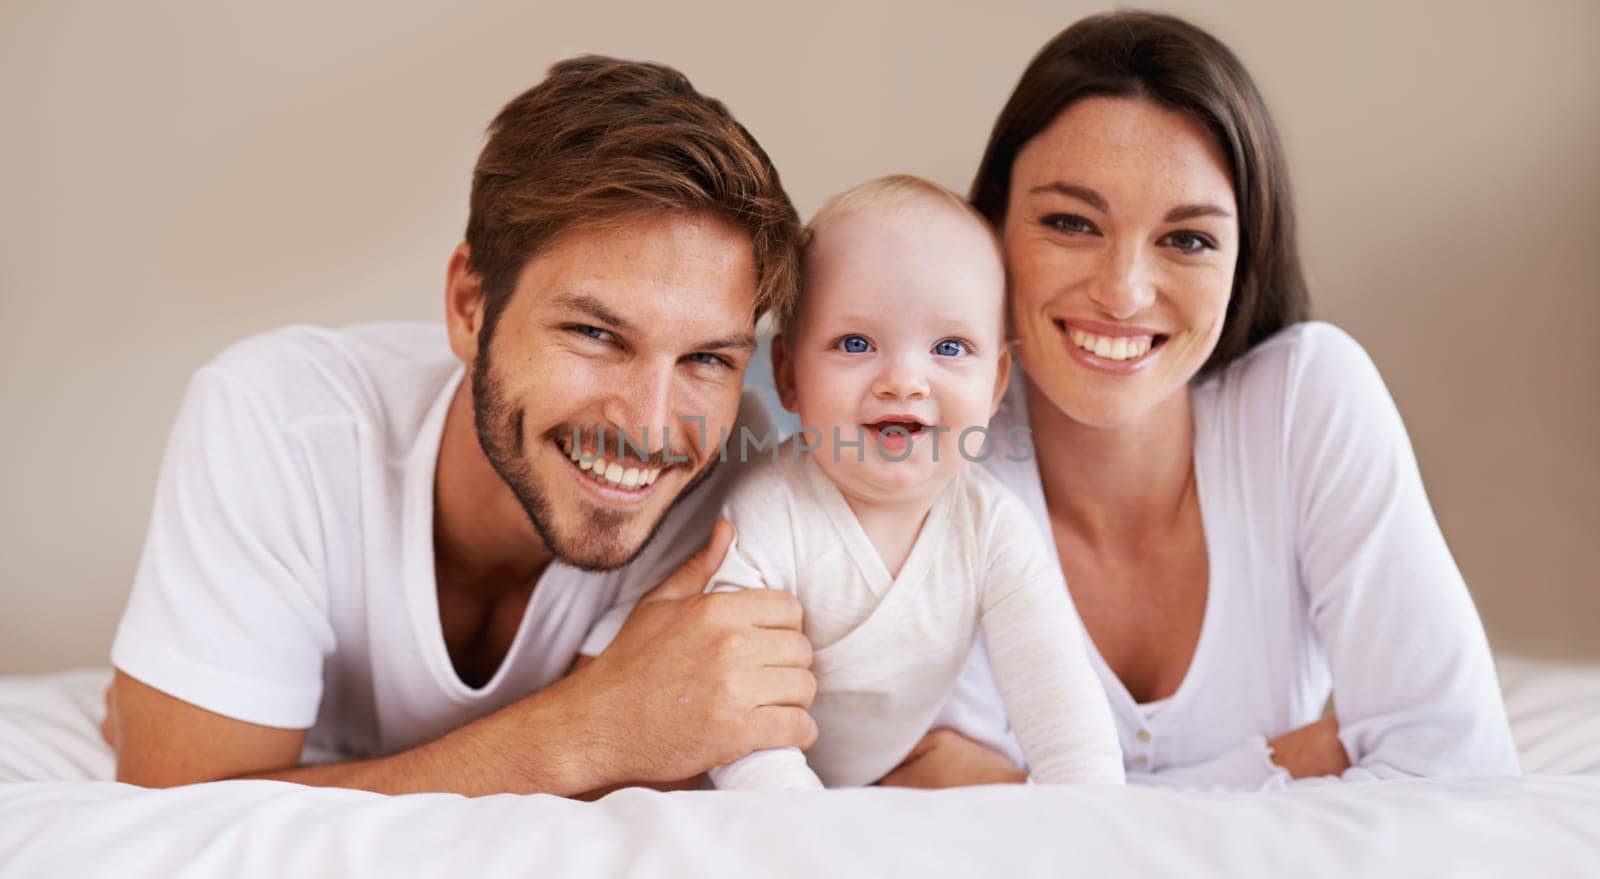 Happy portrait, dad and mom of baby kid on bed for love, care and quality time together to relax at home. Smile of family, parents and cute newborn child for development, caring support and happiness.